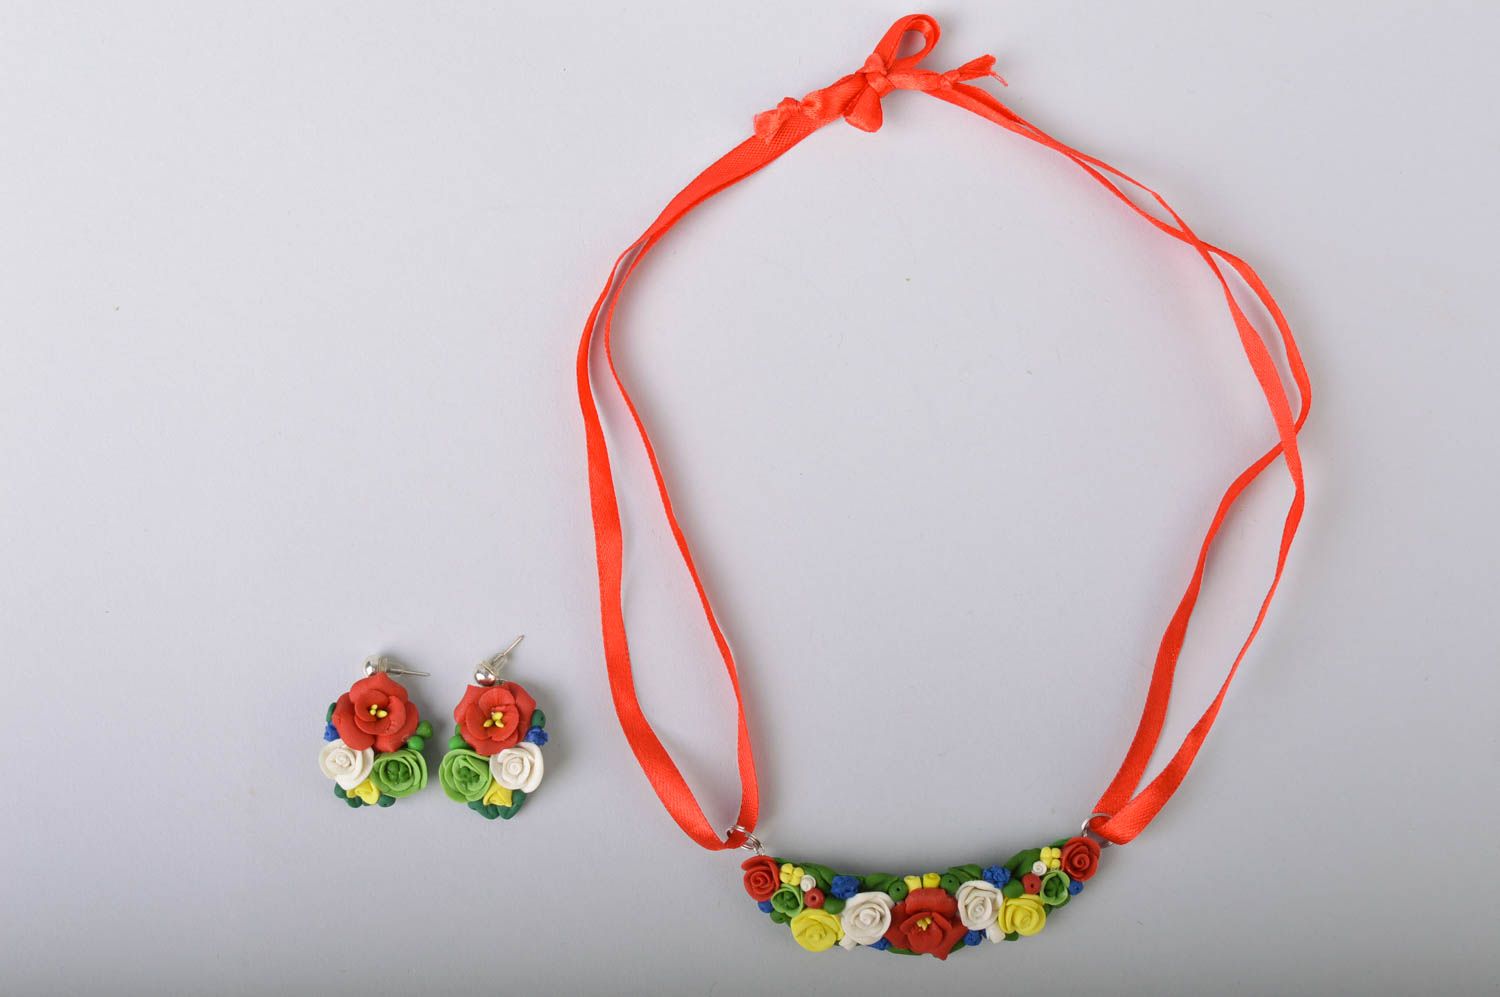 Handmade colorful floral cold porcelain jewelry set earrings and necklace photo 2